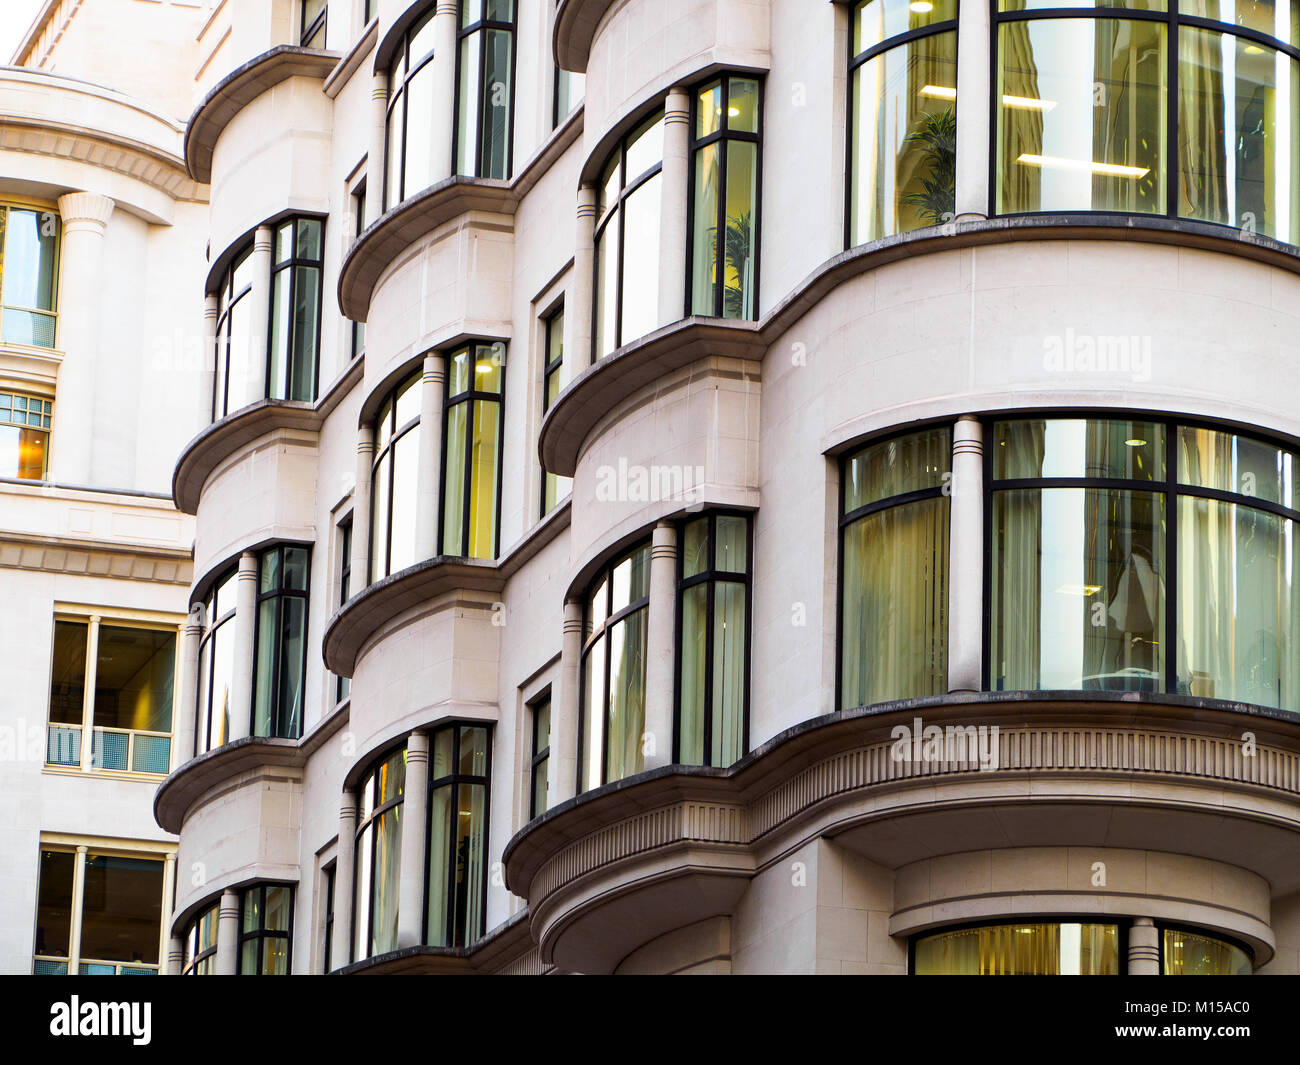 Apartment house facade detail in the City of London - London, England Stock Photo